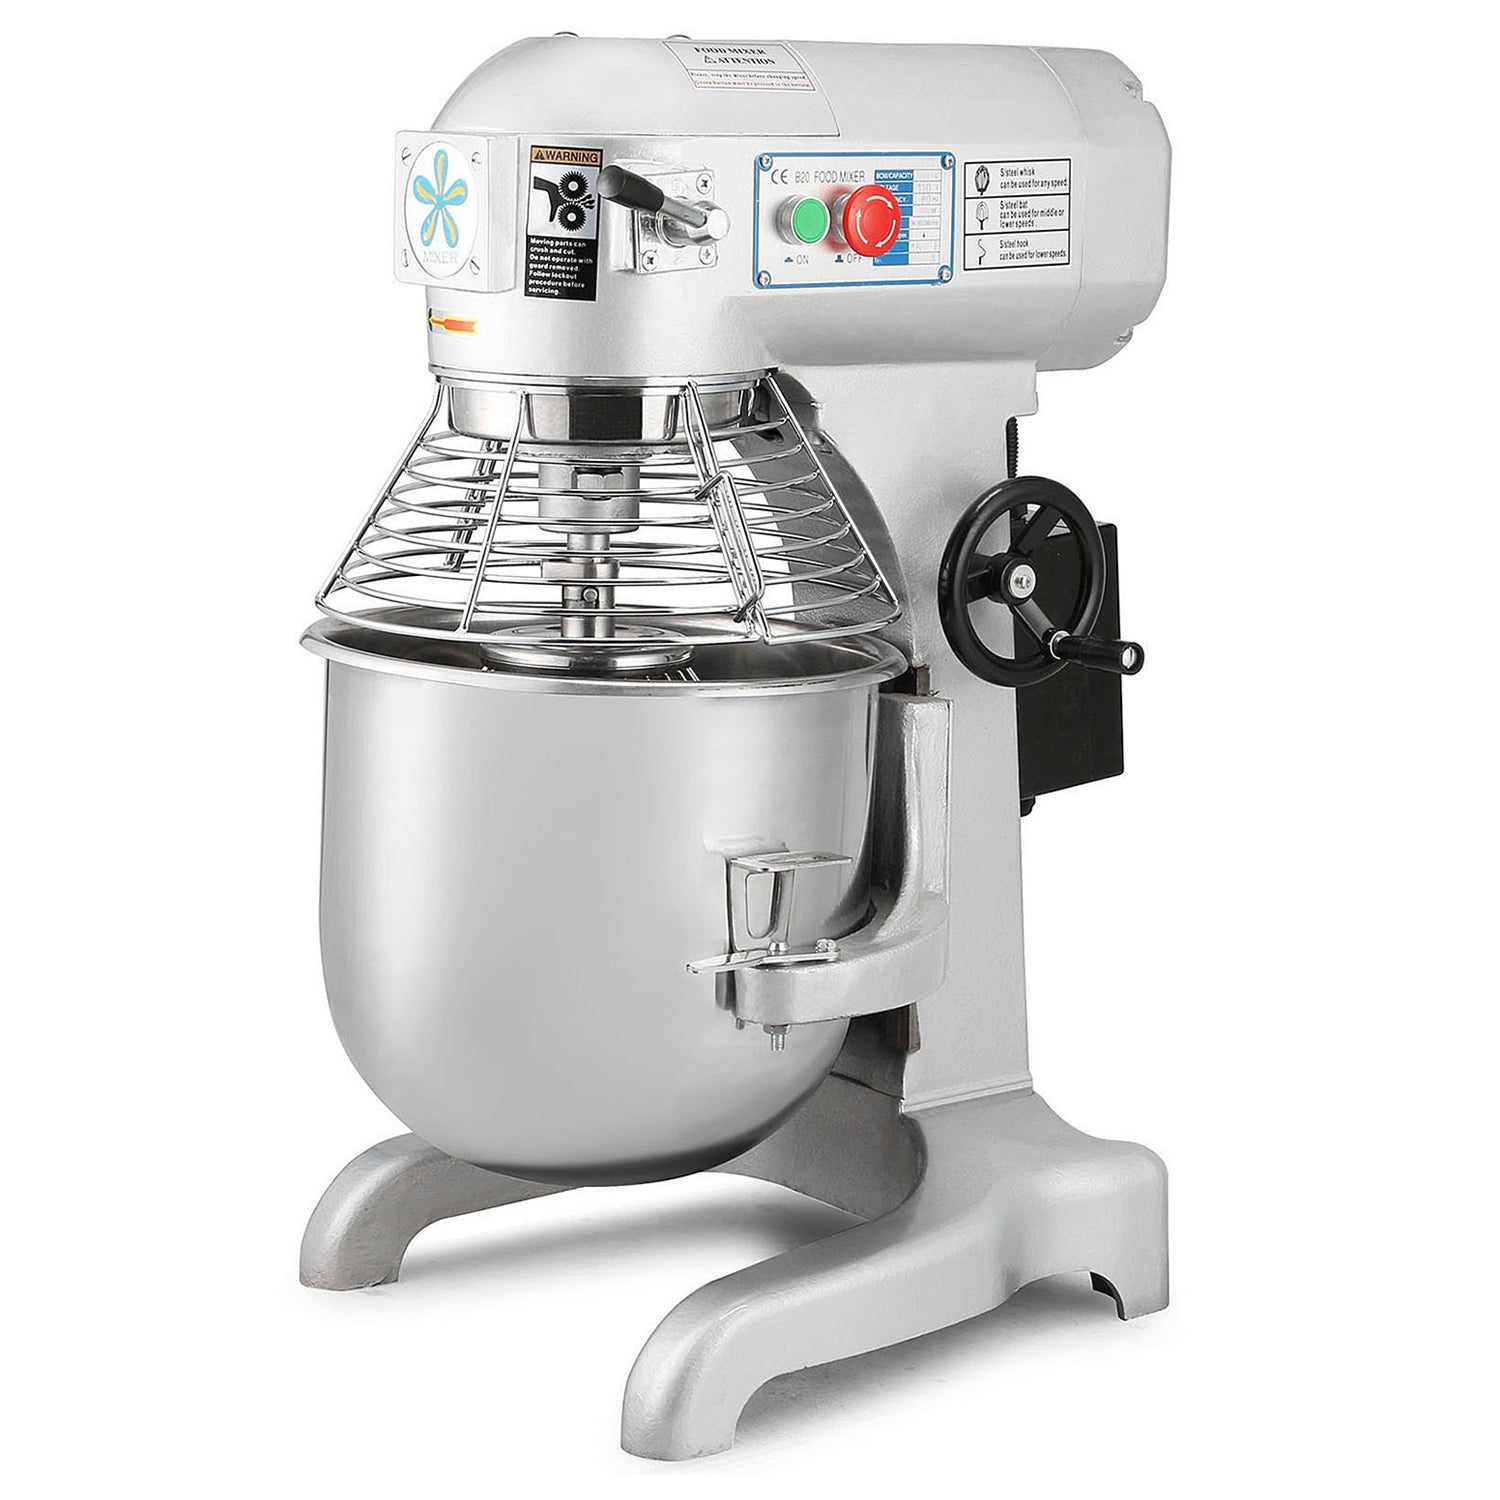 GR-30QT Food Mixer | Commercial Planetary Mixer with Dough Hook, Wire Whip & Beater | 30QT